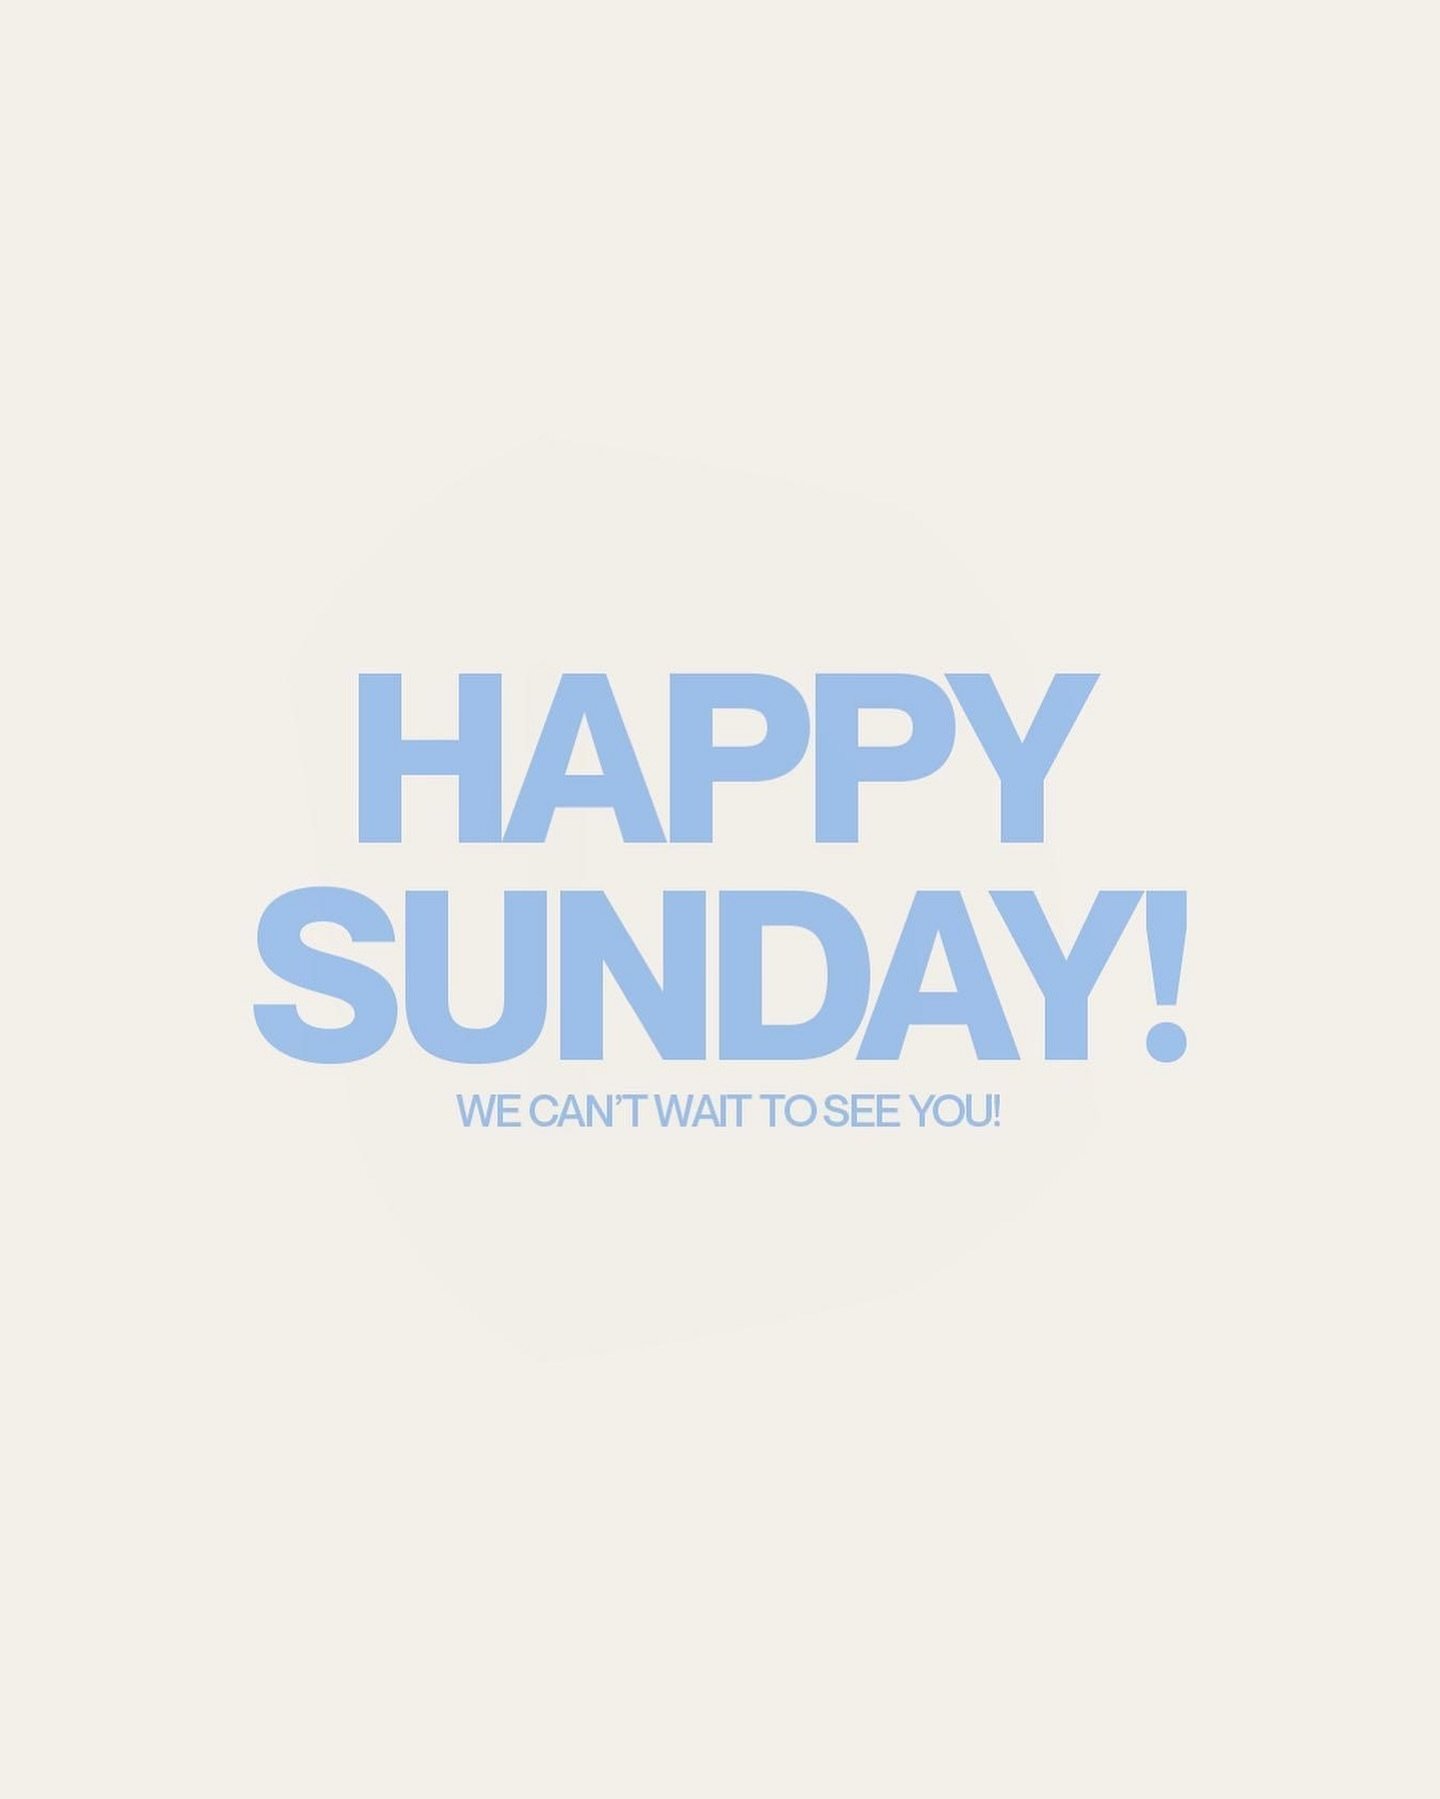 Happy Sunday! ☀️ 
It&rsquo;s a beautiful day to be in God&rsquo;s house. Bring your crew, invite a friend and come be a part of an incredible Sunday at Hilltop! 

Hilltop Church
Sundays at 9AM &amp; 11AM
293 E Telegraph St Washington
#yourhilltop #co